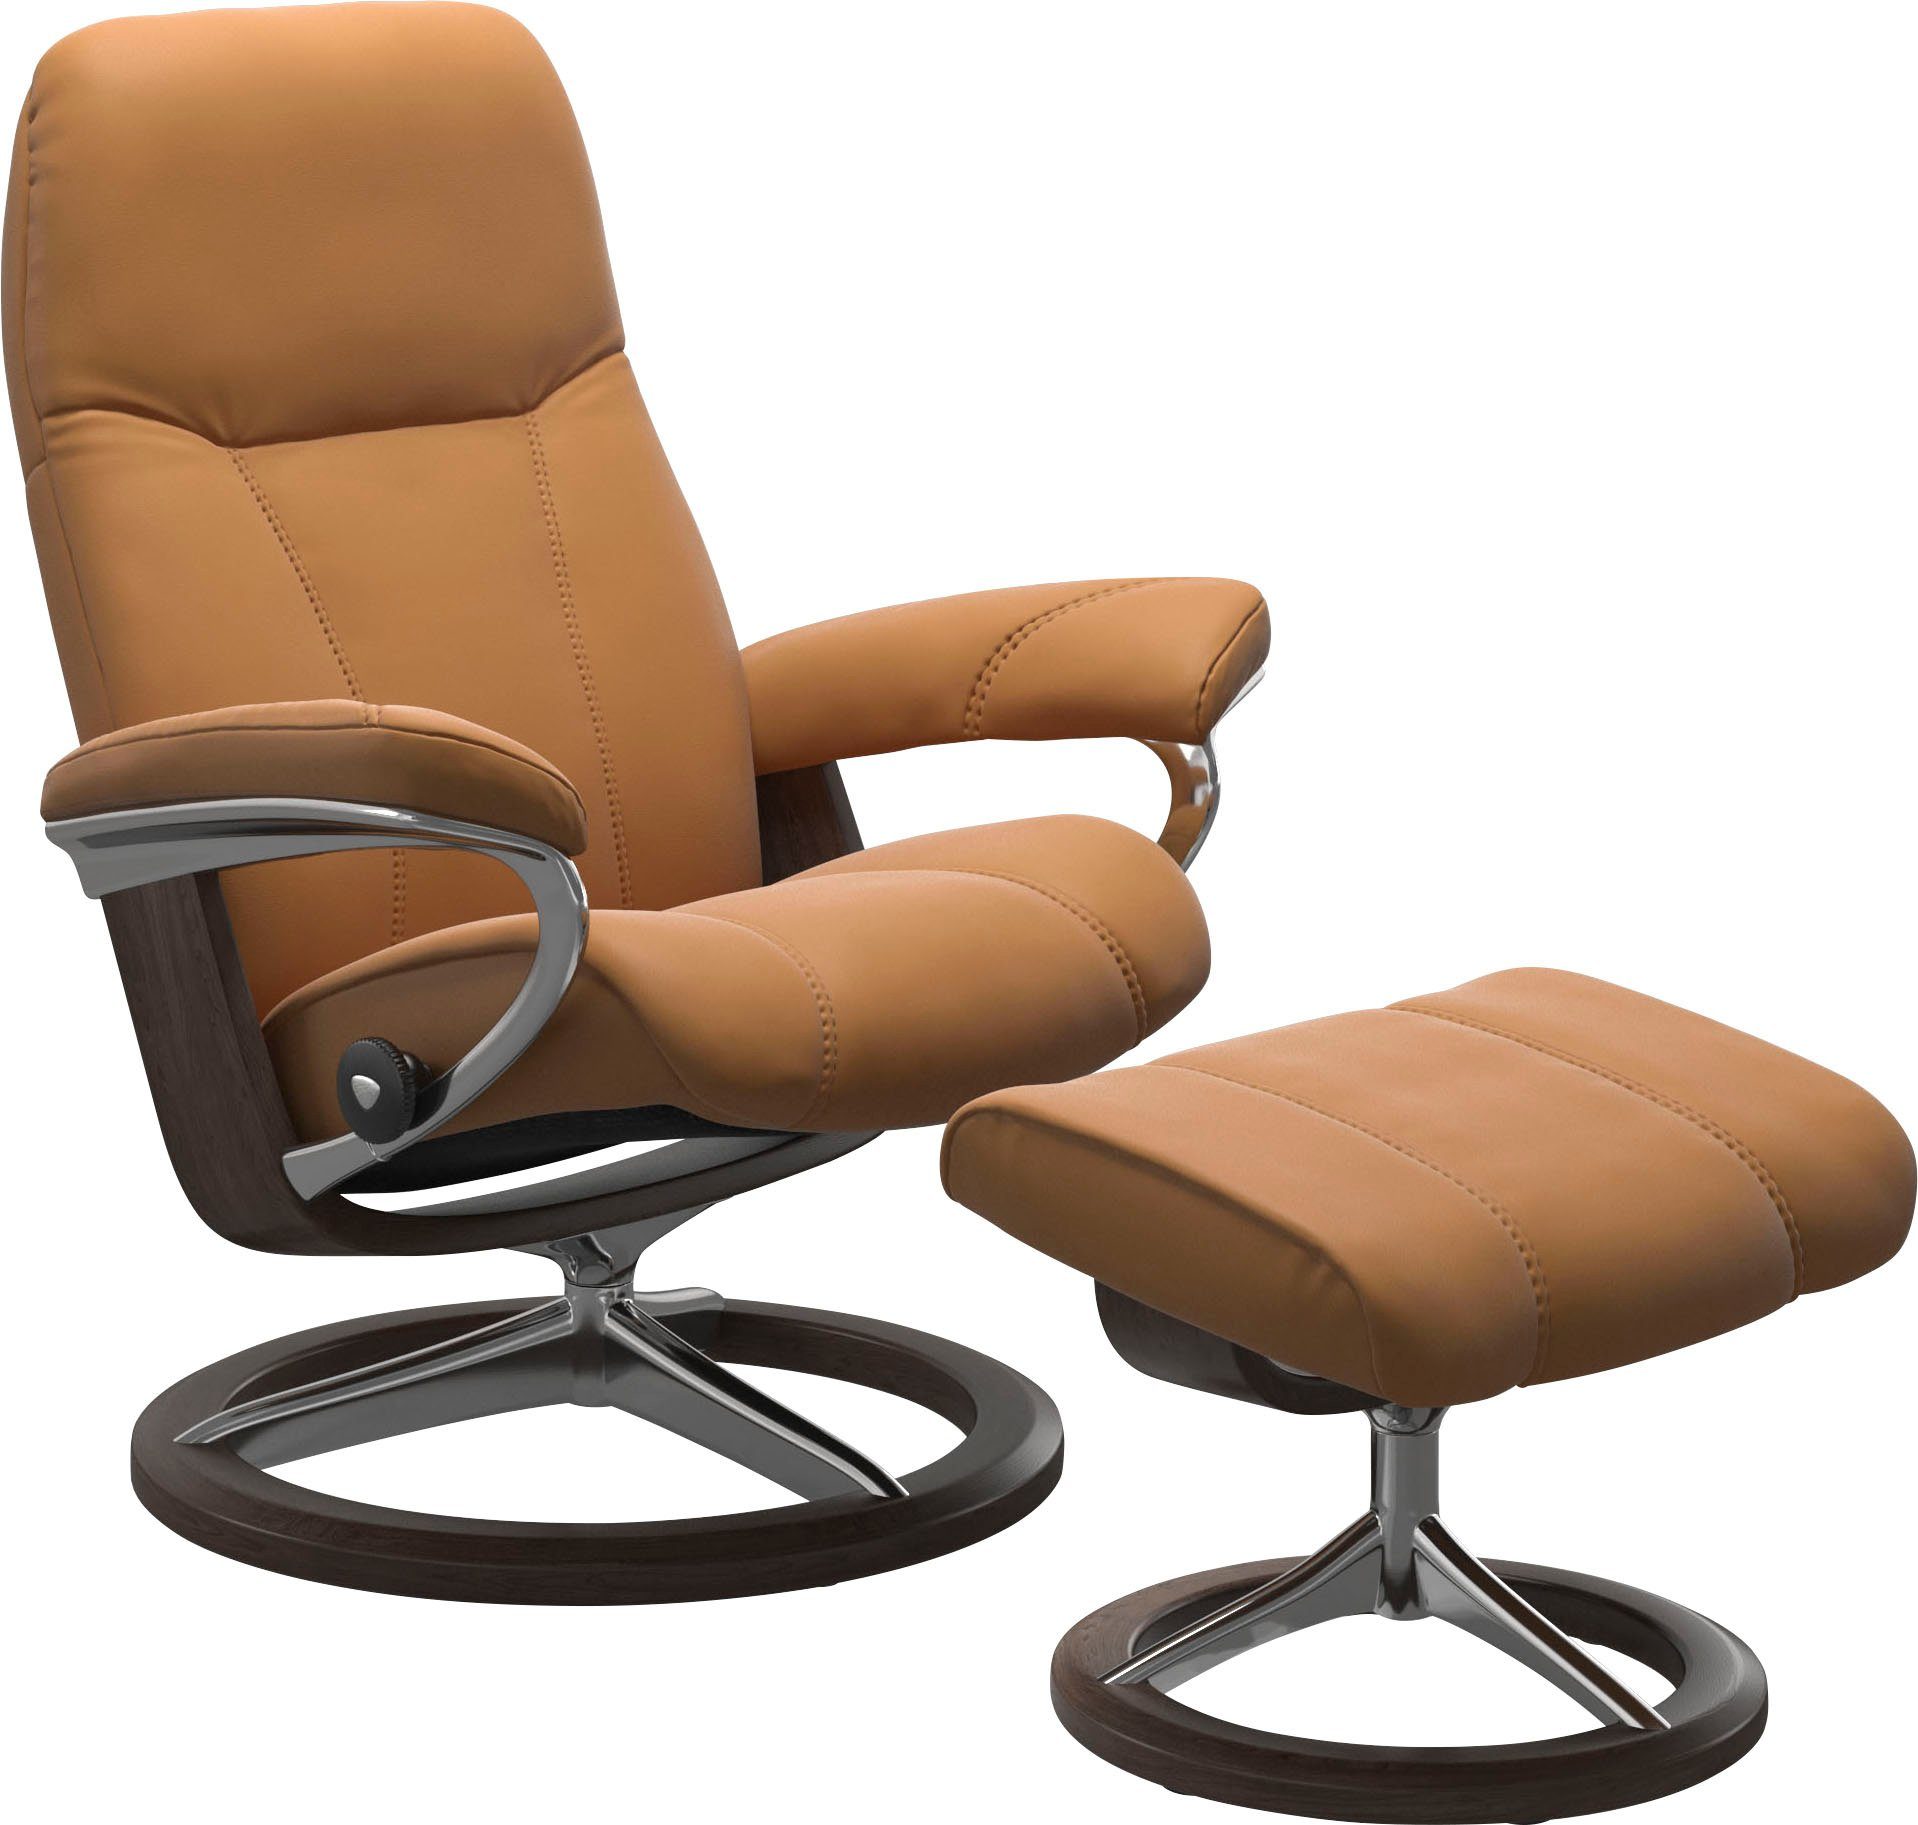 Stressless® Relaxsessel Consul, mit Signature Base, Größe M, Gestell Wenge | Funktionssessel